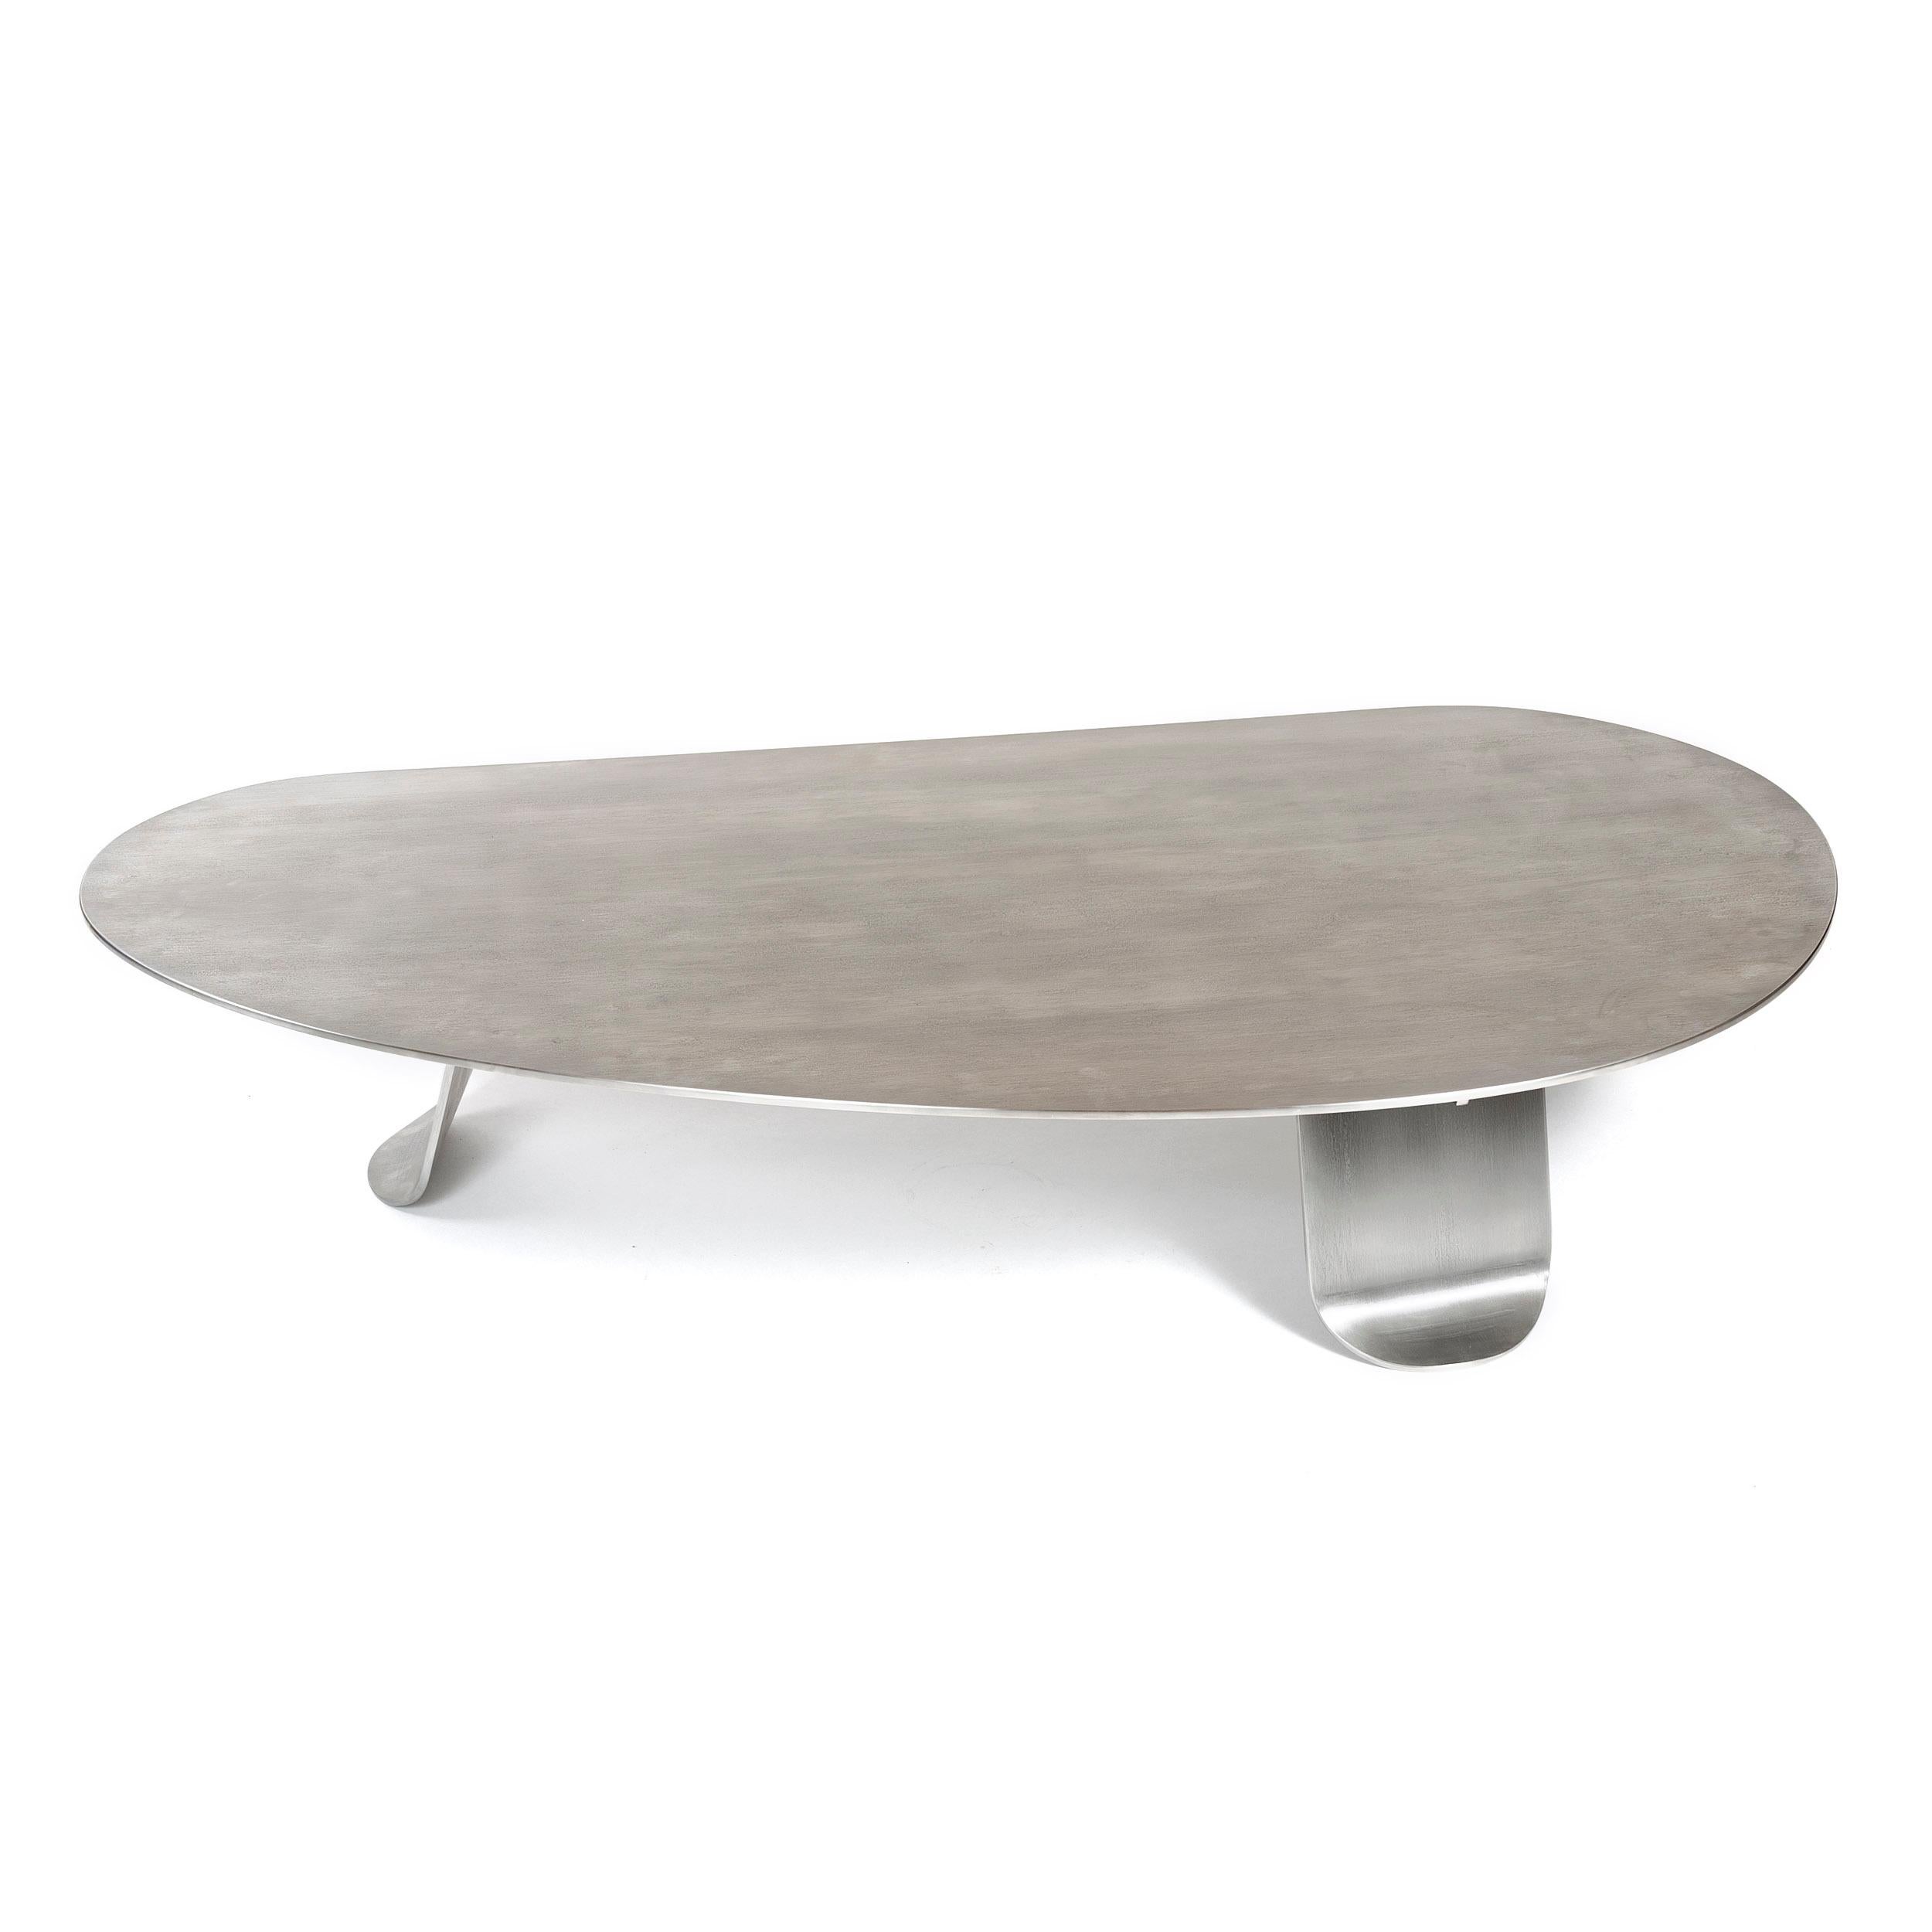 A low coffee/cocktail table of thick, plate natural grain stainless steel. The expansive, organically shaped top is set upon three wide, thick plate steel legs each having gradually tapering sides terminating in softened corners and subtle,